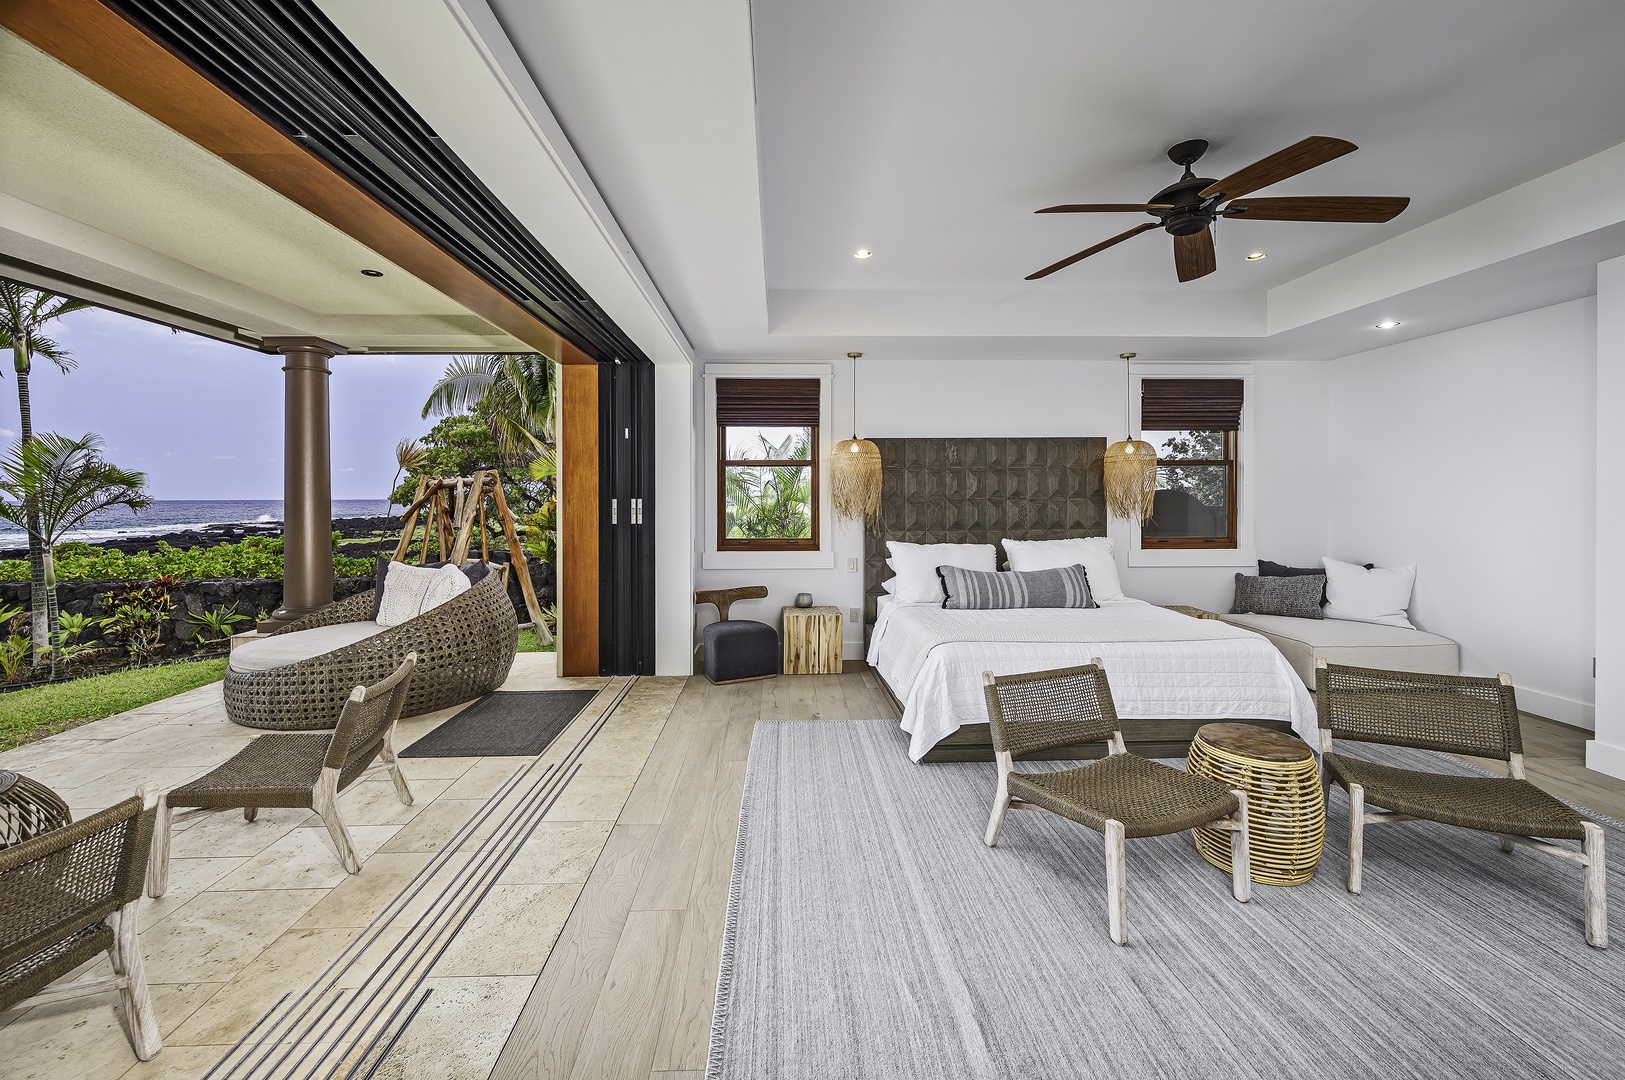 Kailua Kona Vacation Rentals, Alohi Kai Estate** - 2nd Floor Master has a huge outdoor lanai with views for miles and outdoor Restoration Hardware furniture with oversized lounge chairs and chaise lounges